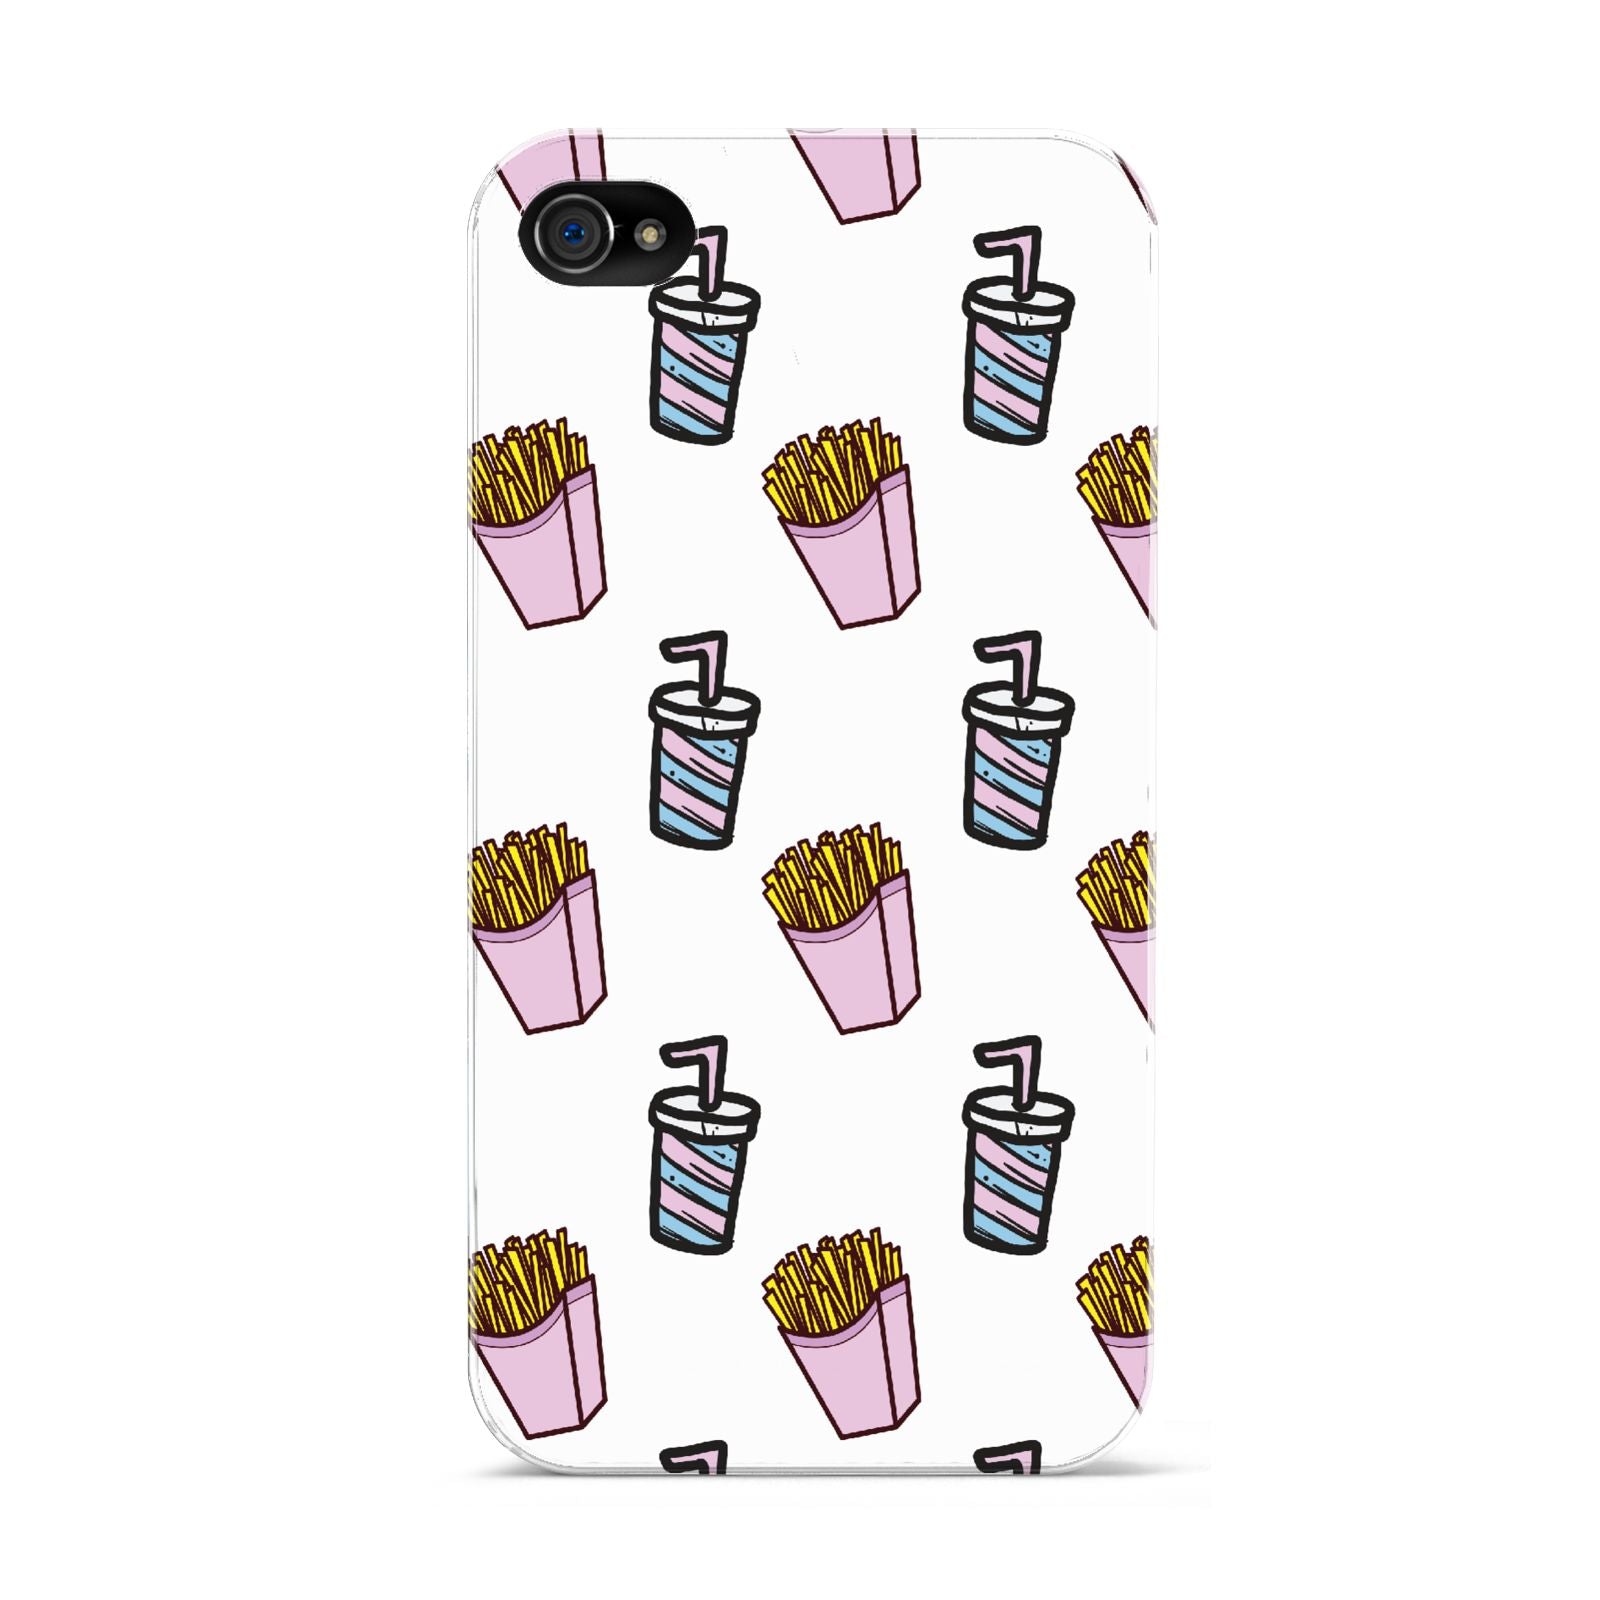 Fries Shake Fast Food Apple iPhone 4s Case